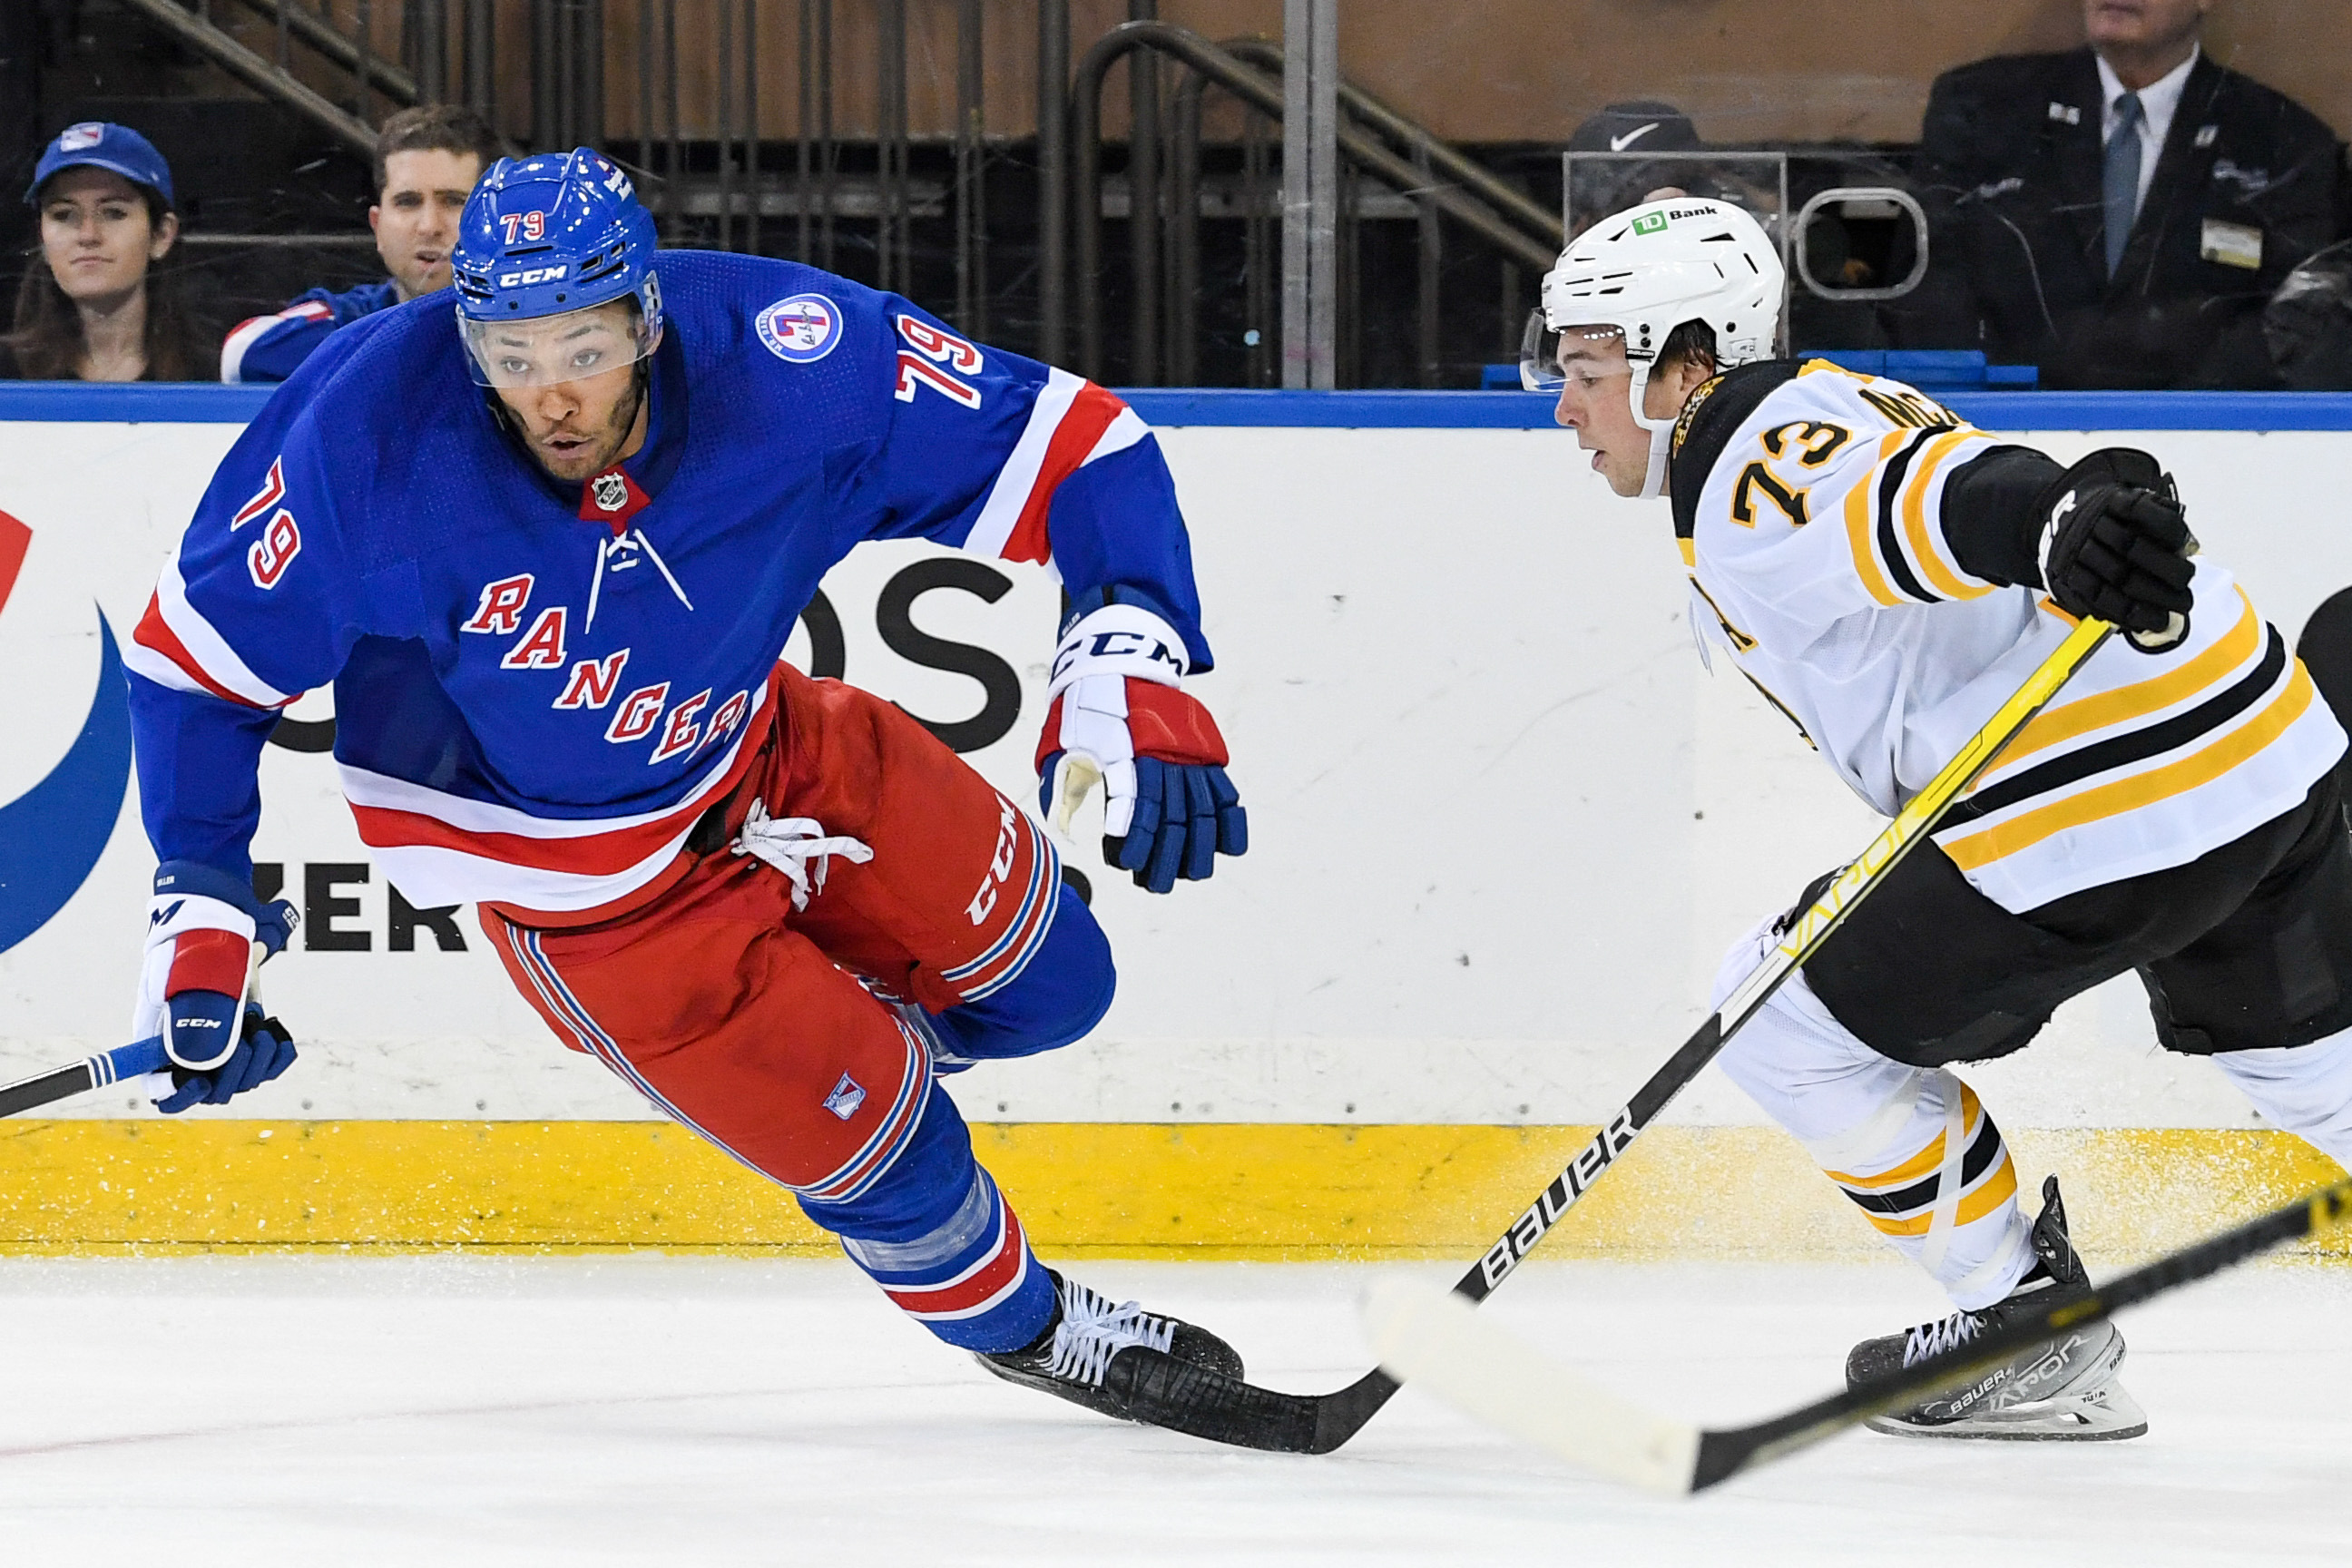 NHL roundup: Rangers rout Sabres, win Peter Laviolette's debut